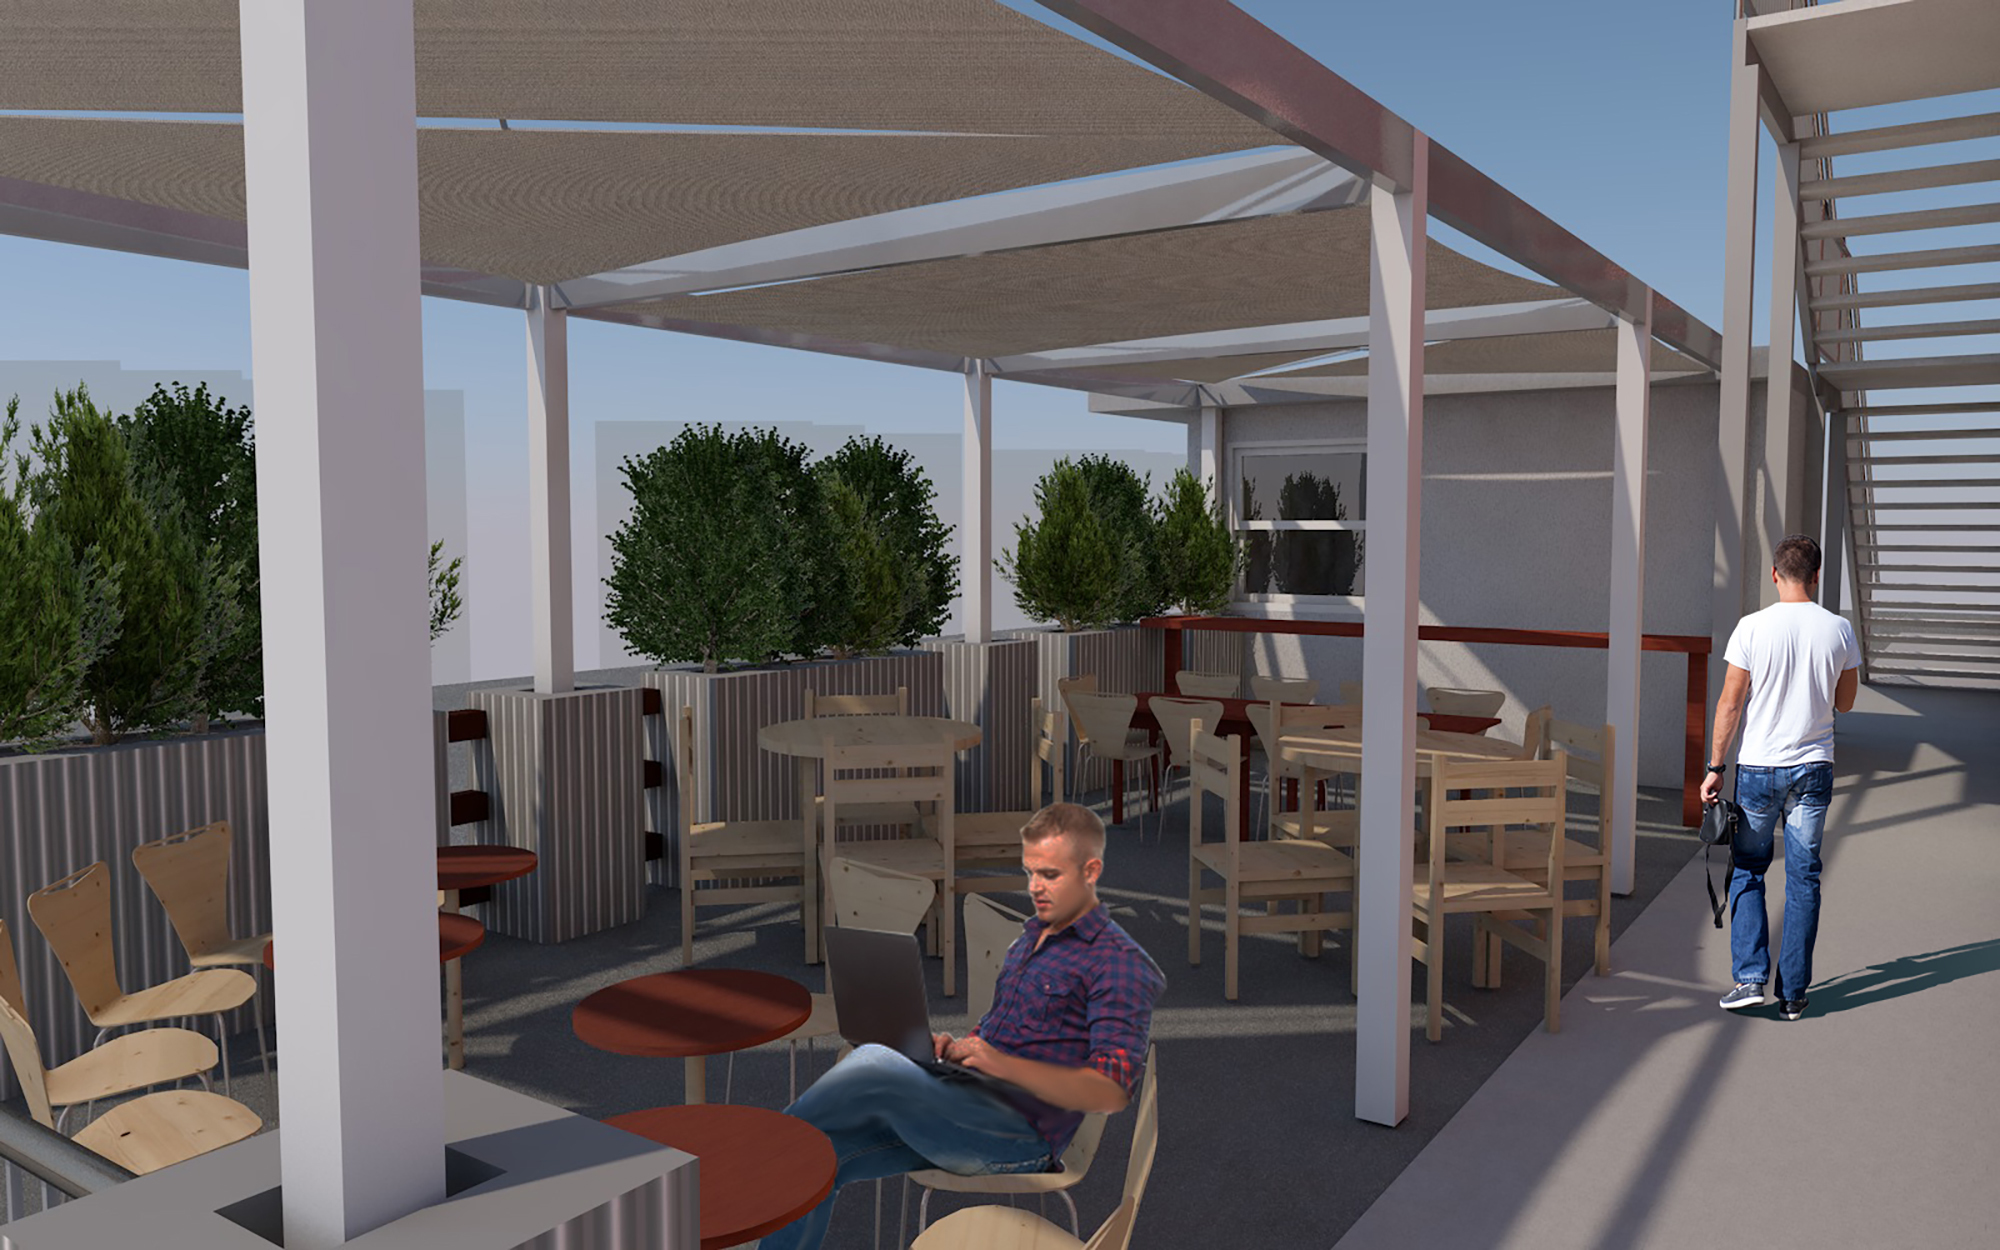 An artist's rendering of the outdoor seating area at Ruby Beach Brewing.